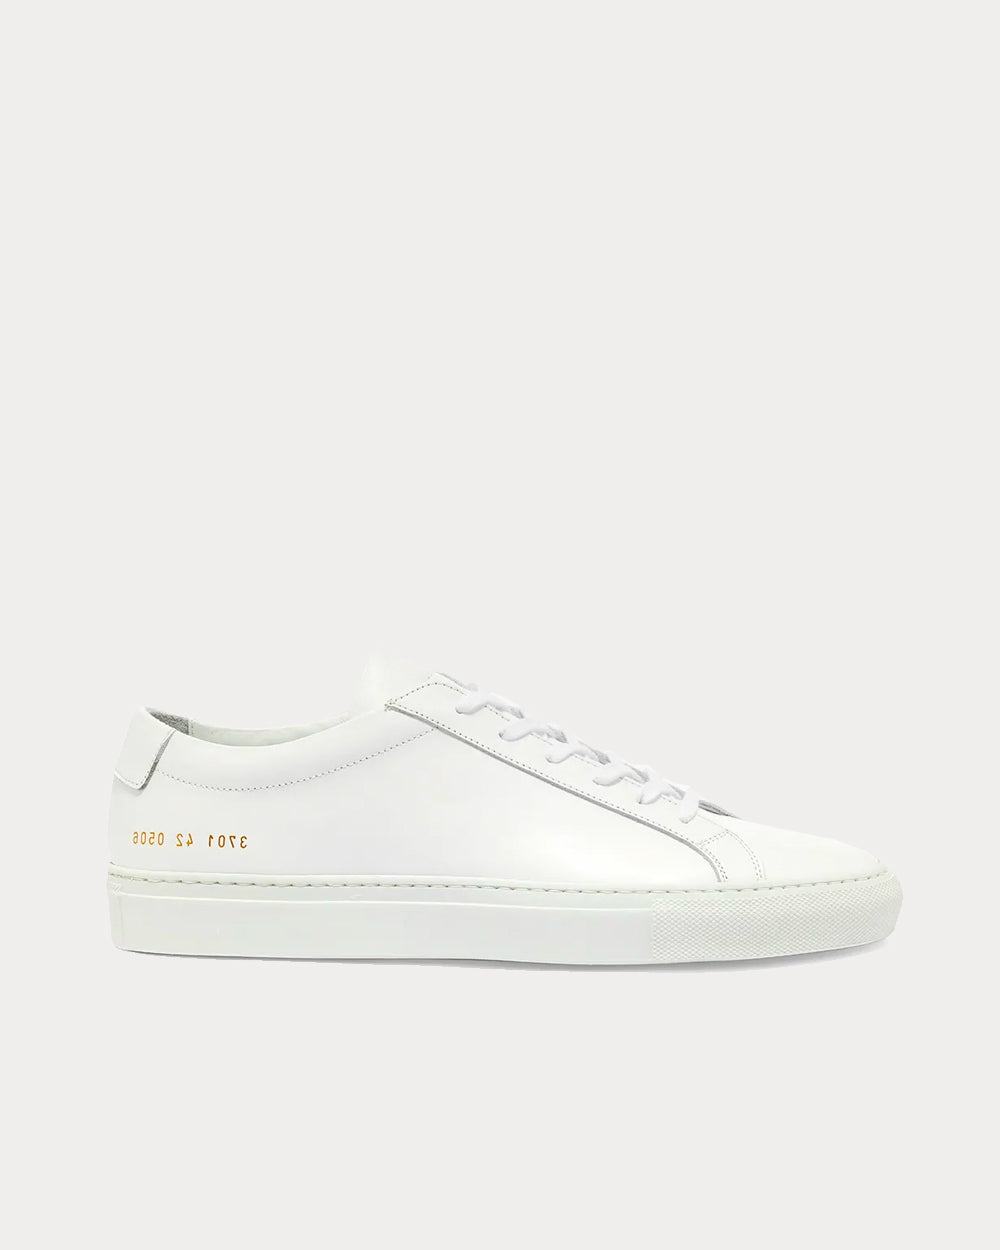 Common Projects Original Achilles leather White Low Top Sneakers